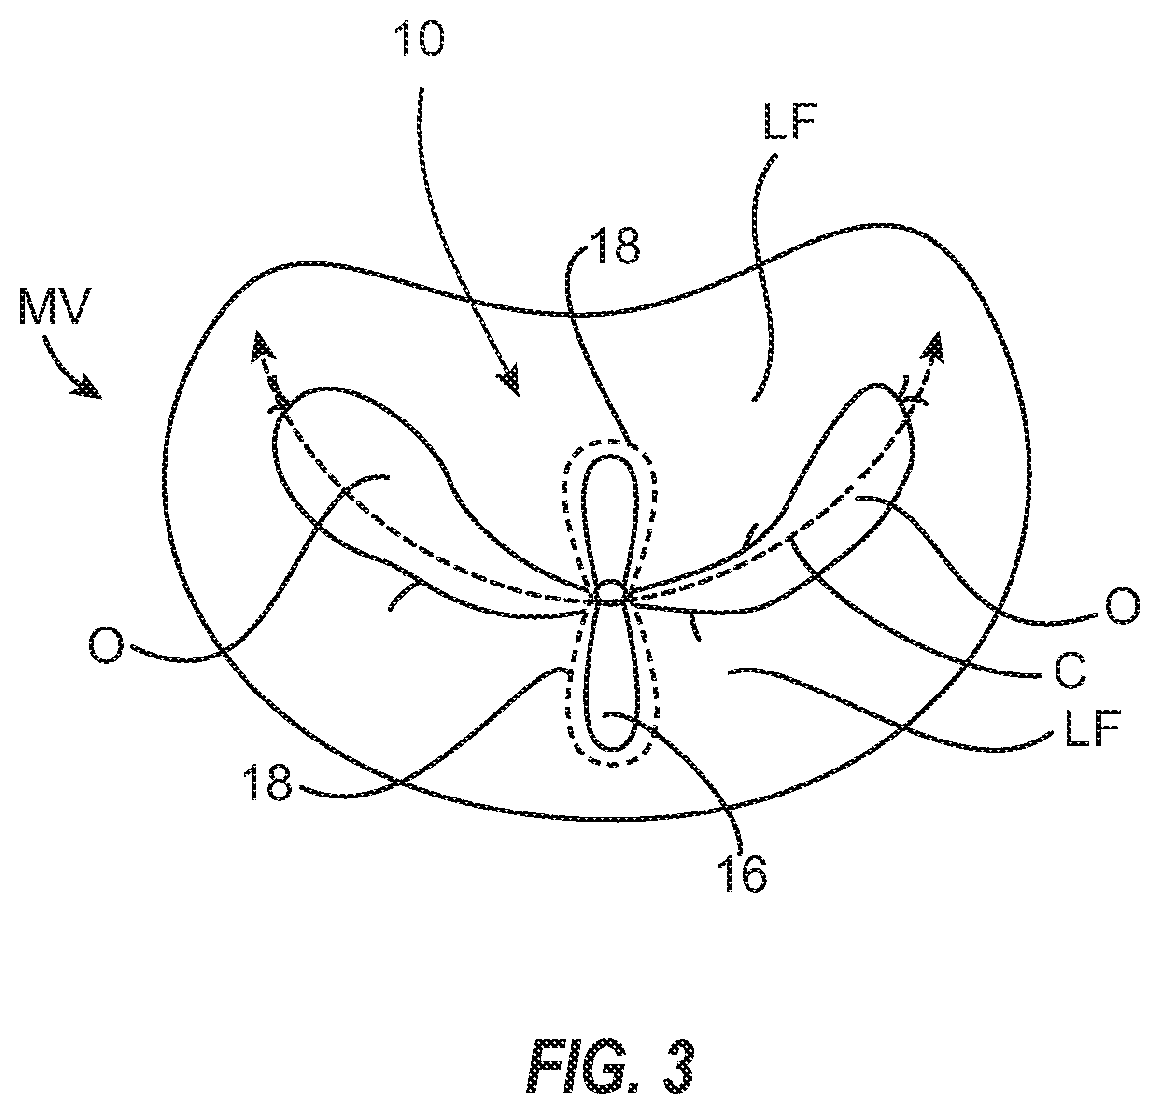 Systems, apparatuses, and methods for removing a medical implant from cardiac tissue